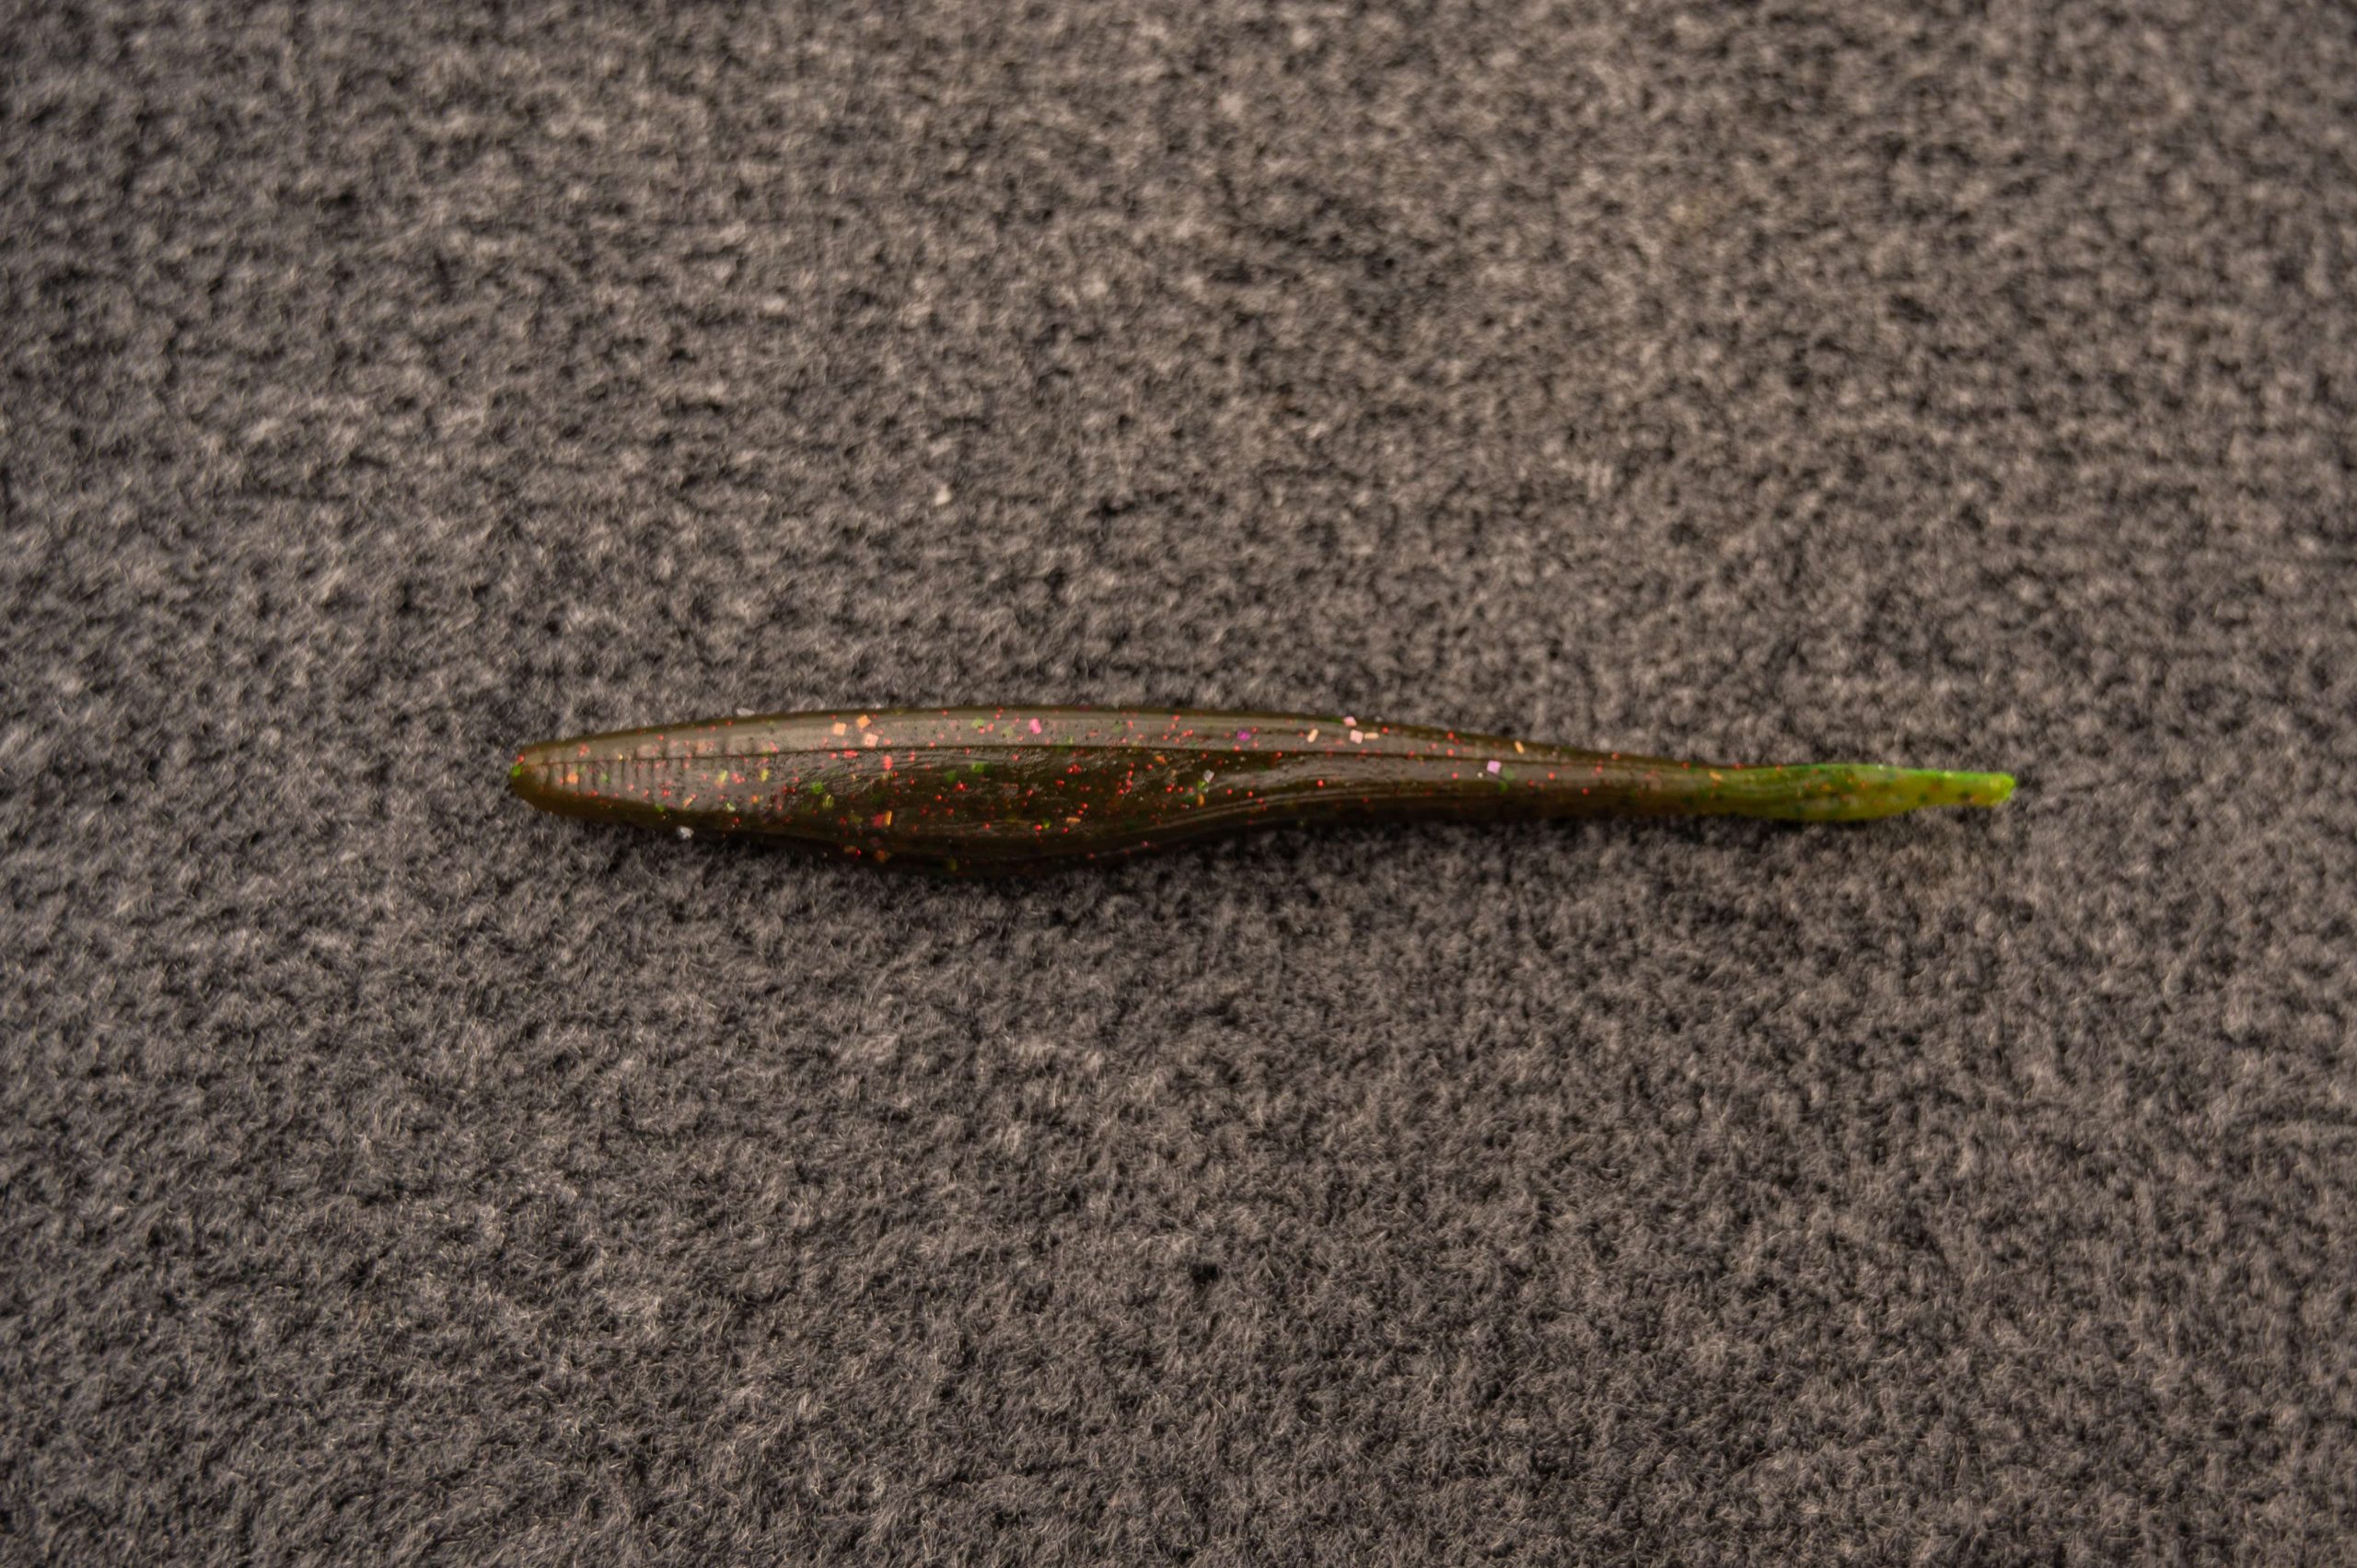 The third bait, shown here, is the V&M Pork Shad. Gleason lets the bite dictate which bait he chooses but notes the Pork Shad glides a little further off the bottom than the Swamp Hog. 